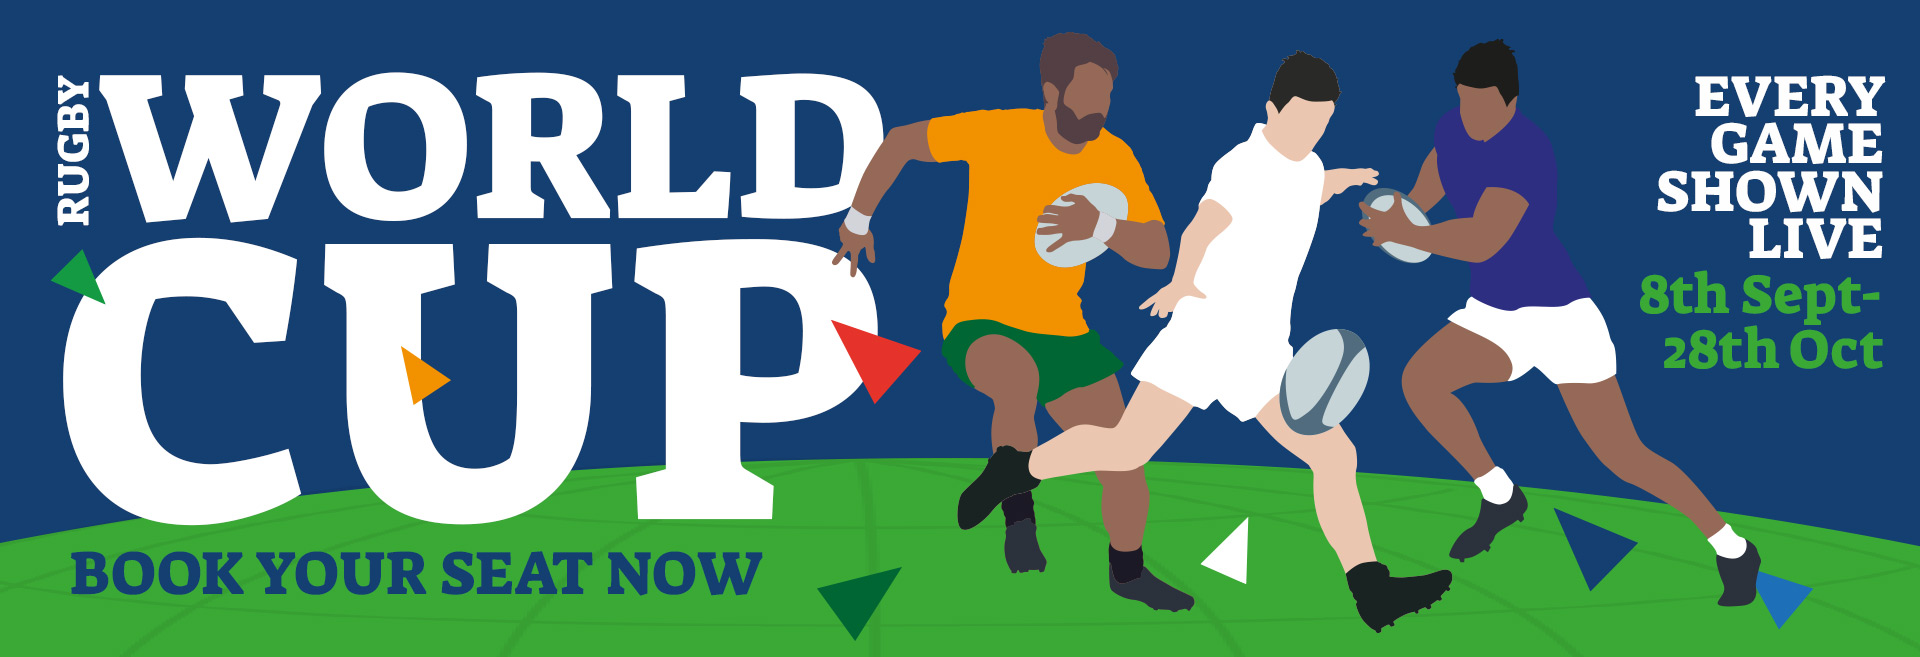 Watch the Rugby World Cup at The Maid Of Muswell